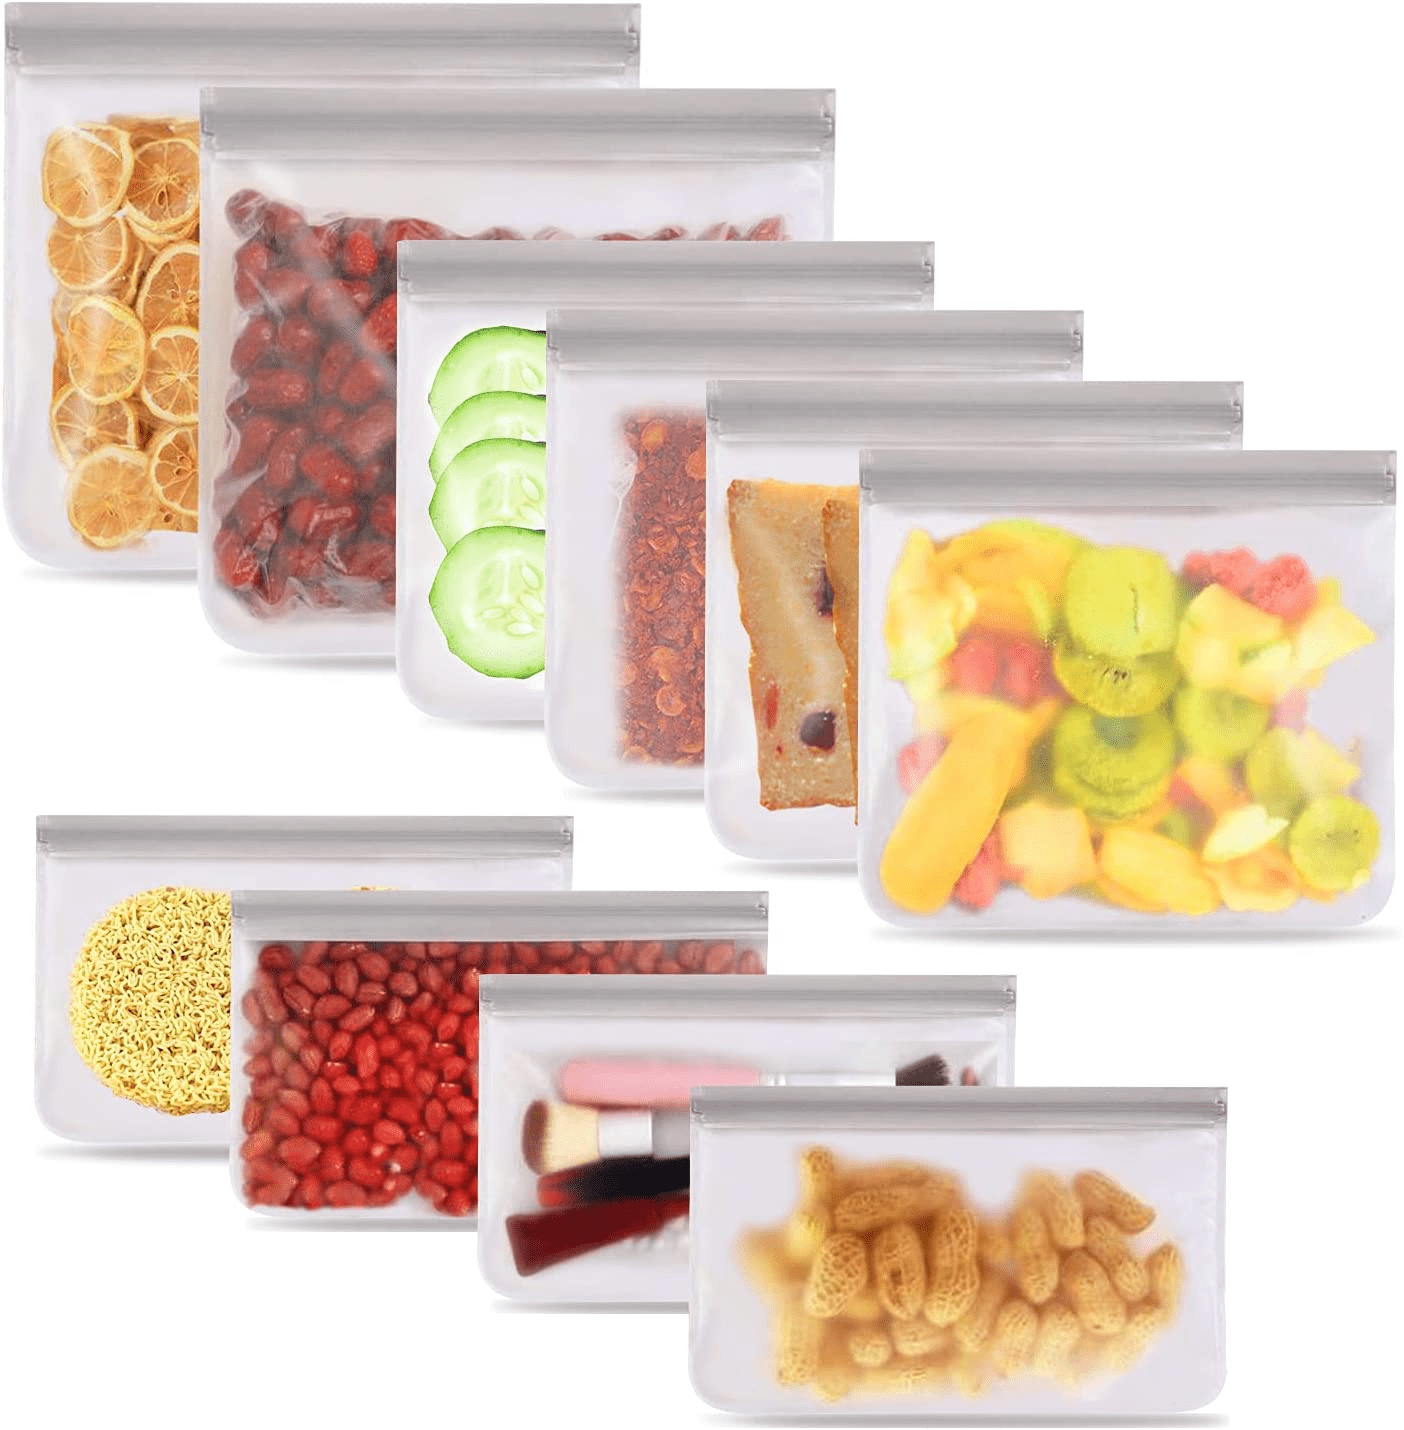 Reusable Silicone Food Fresh Bag Seal Storage Container Freezer Ziplock 10Pack 